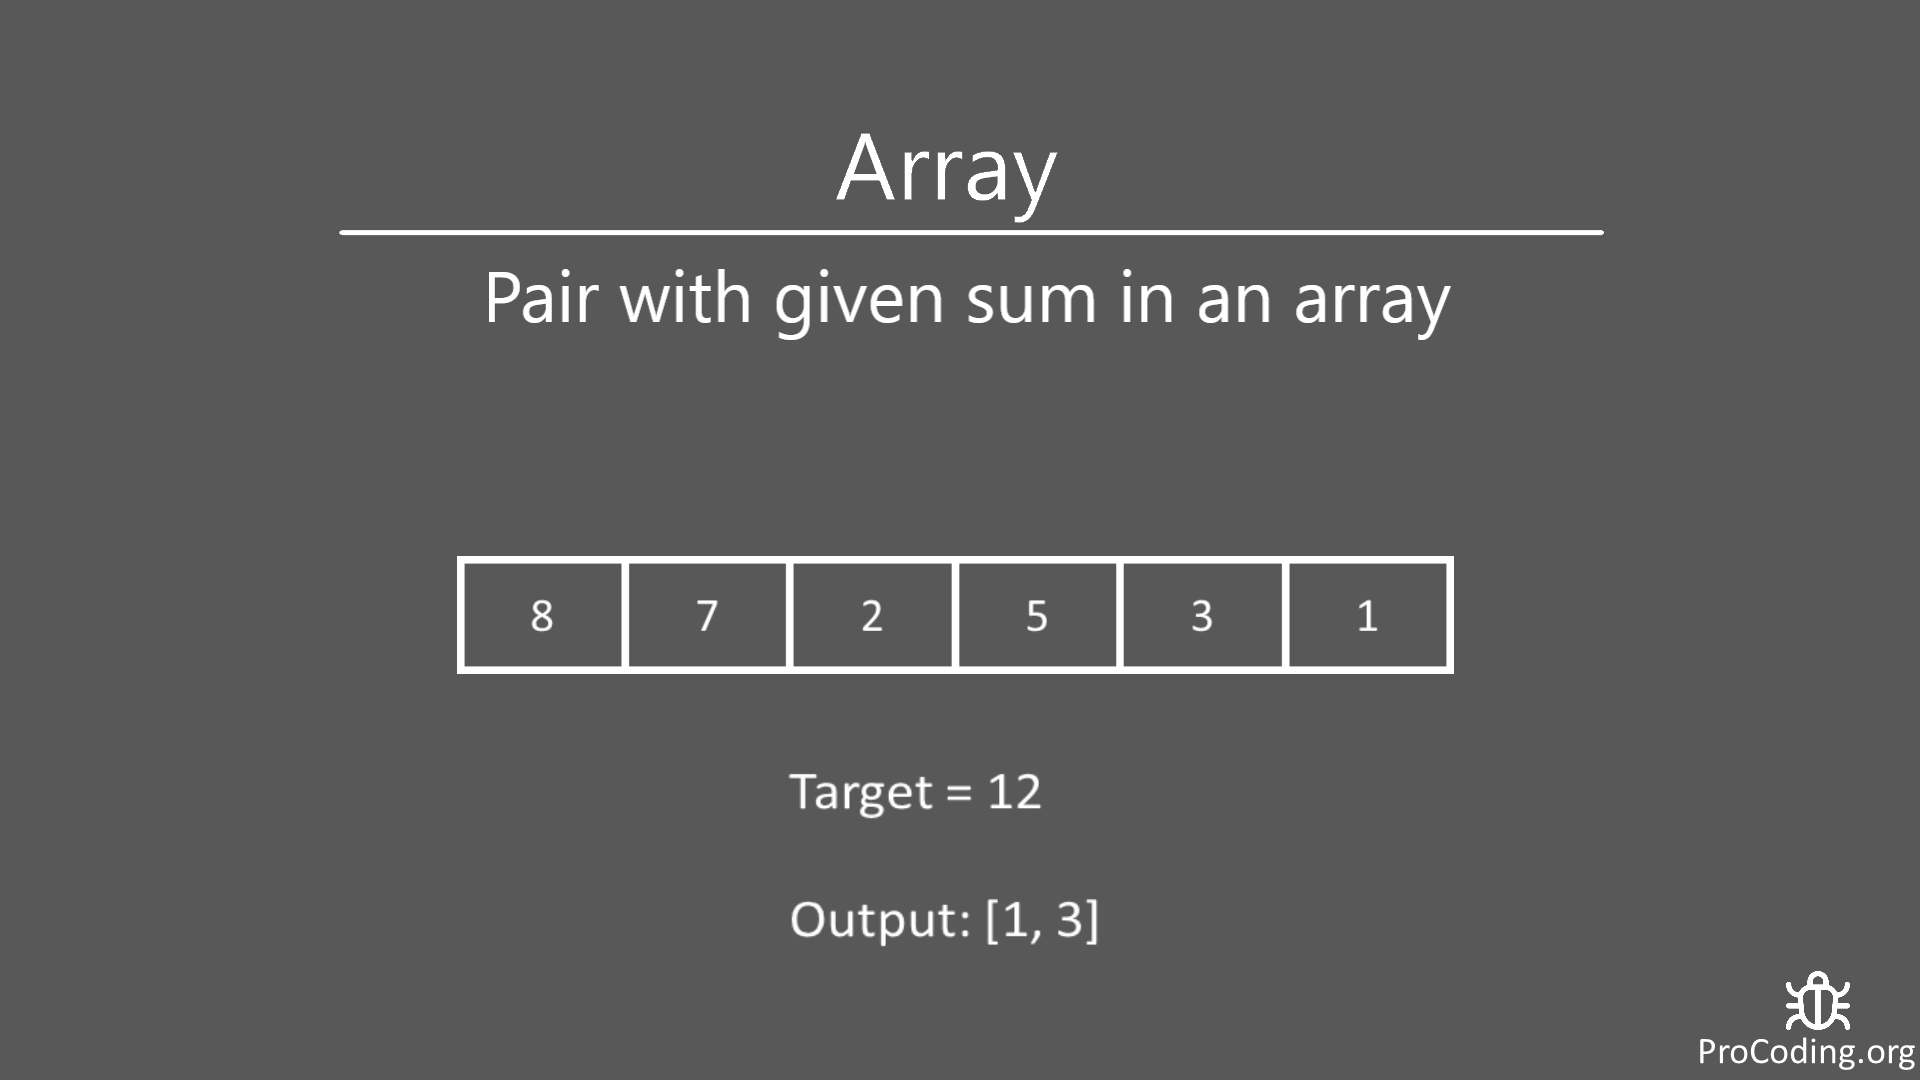 Pair with given sum in an array